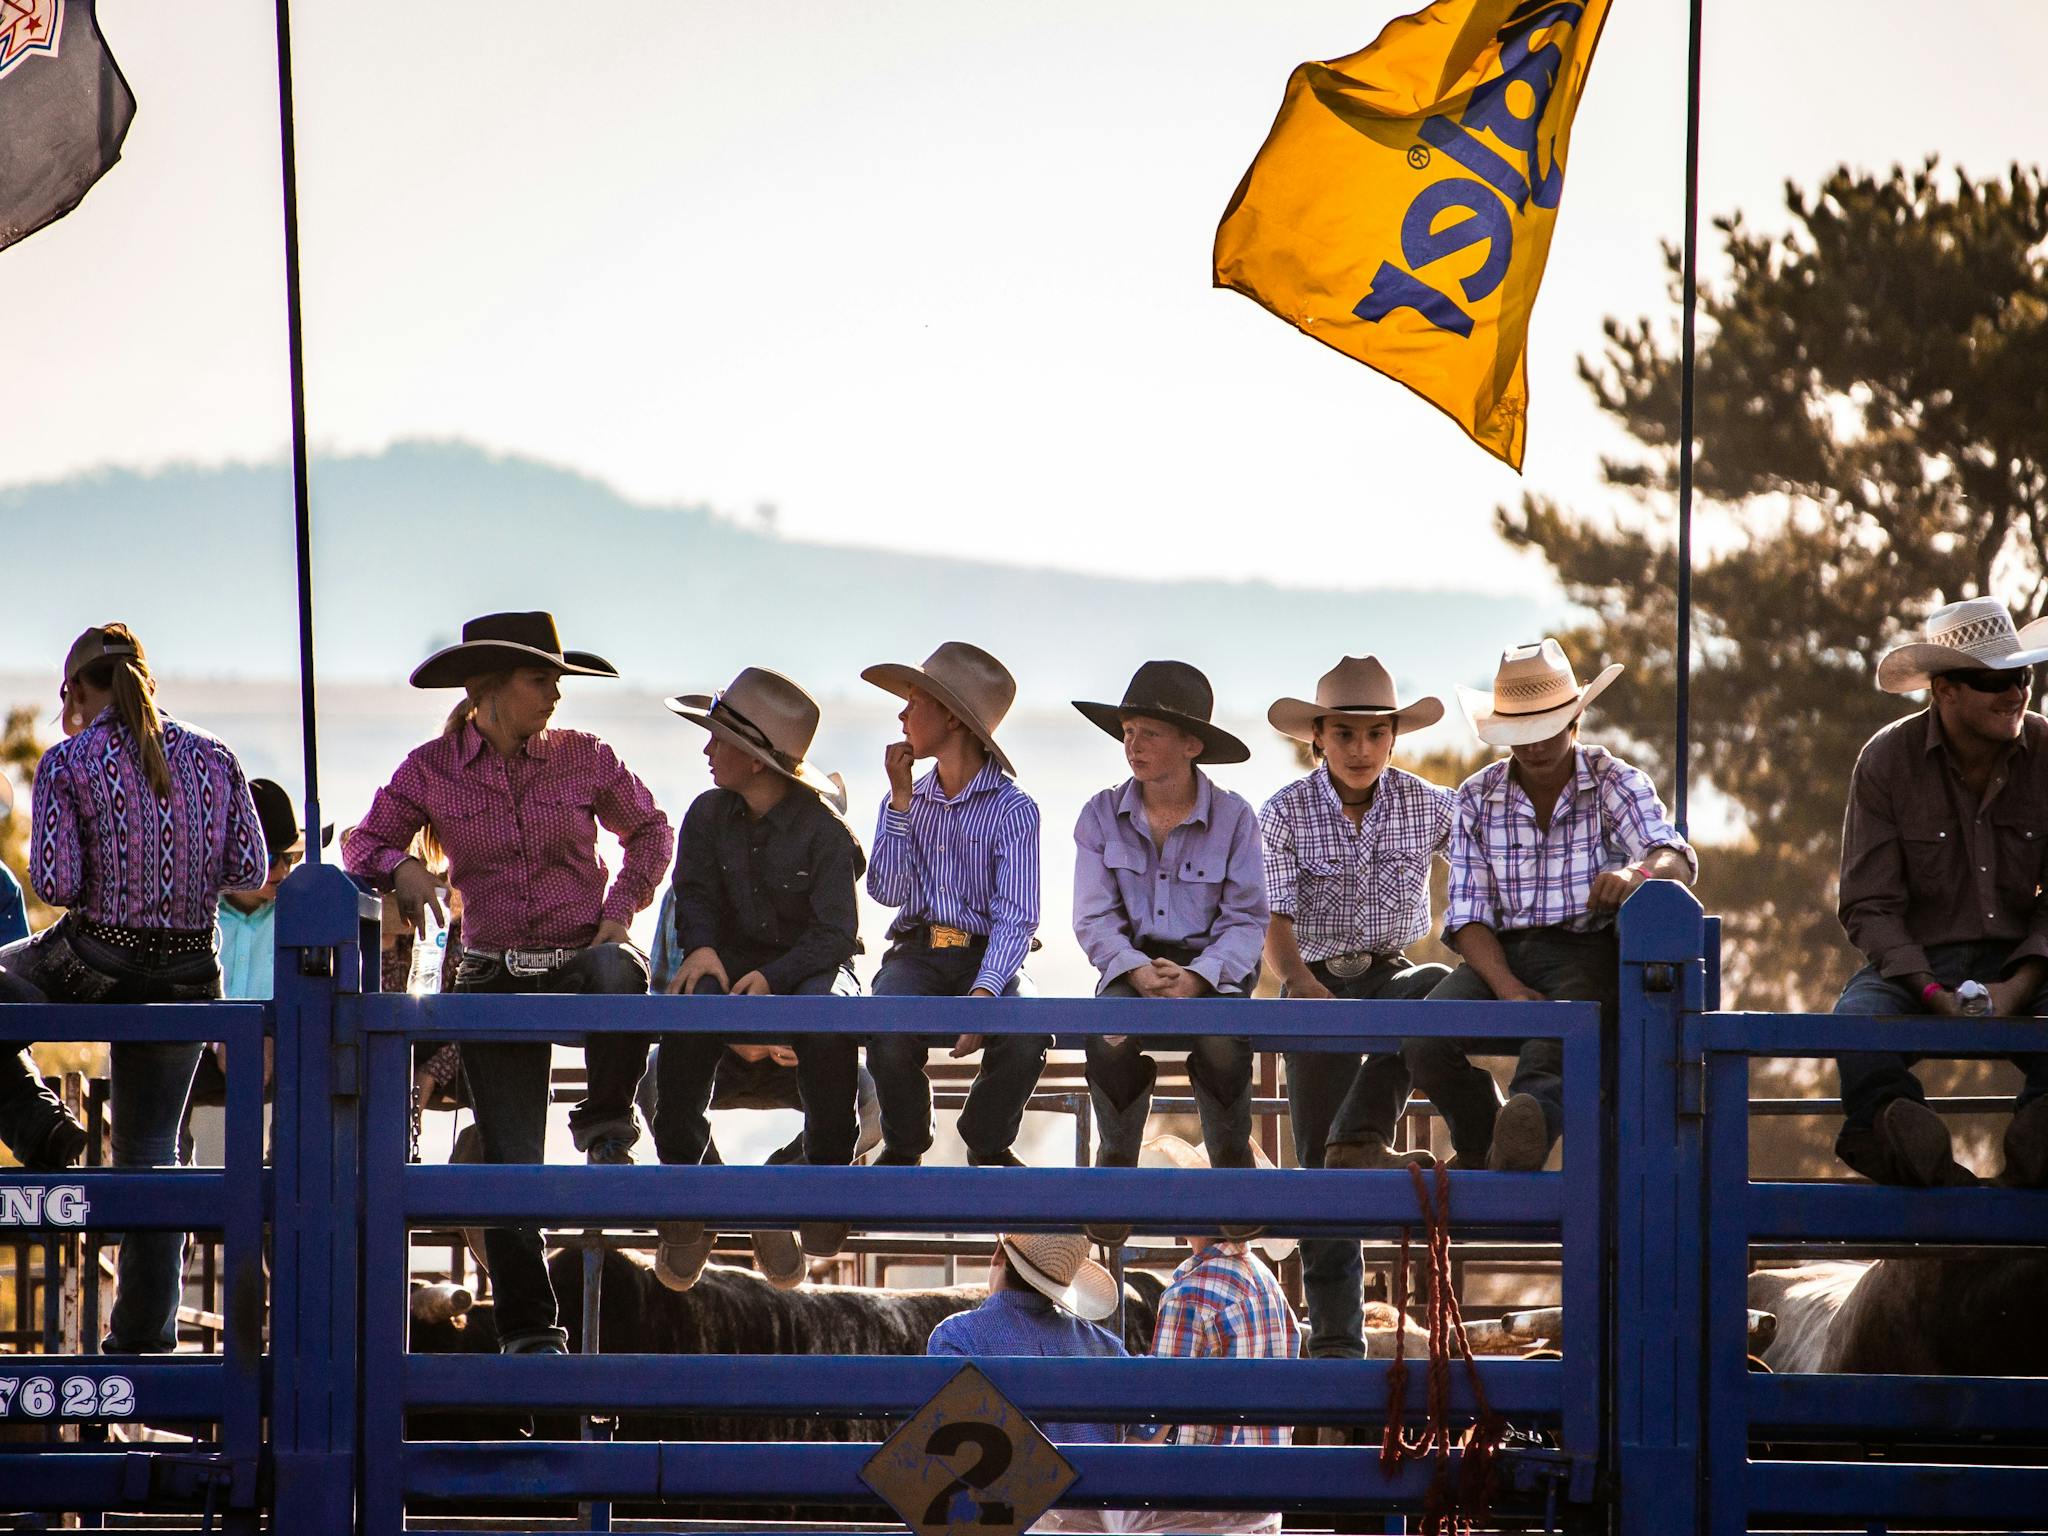 Next generation of cowboys and cowgirls